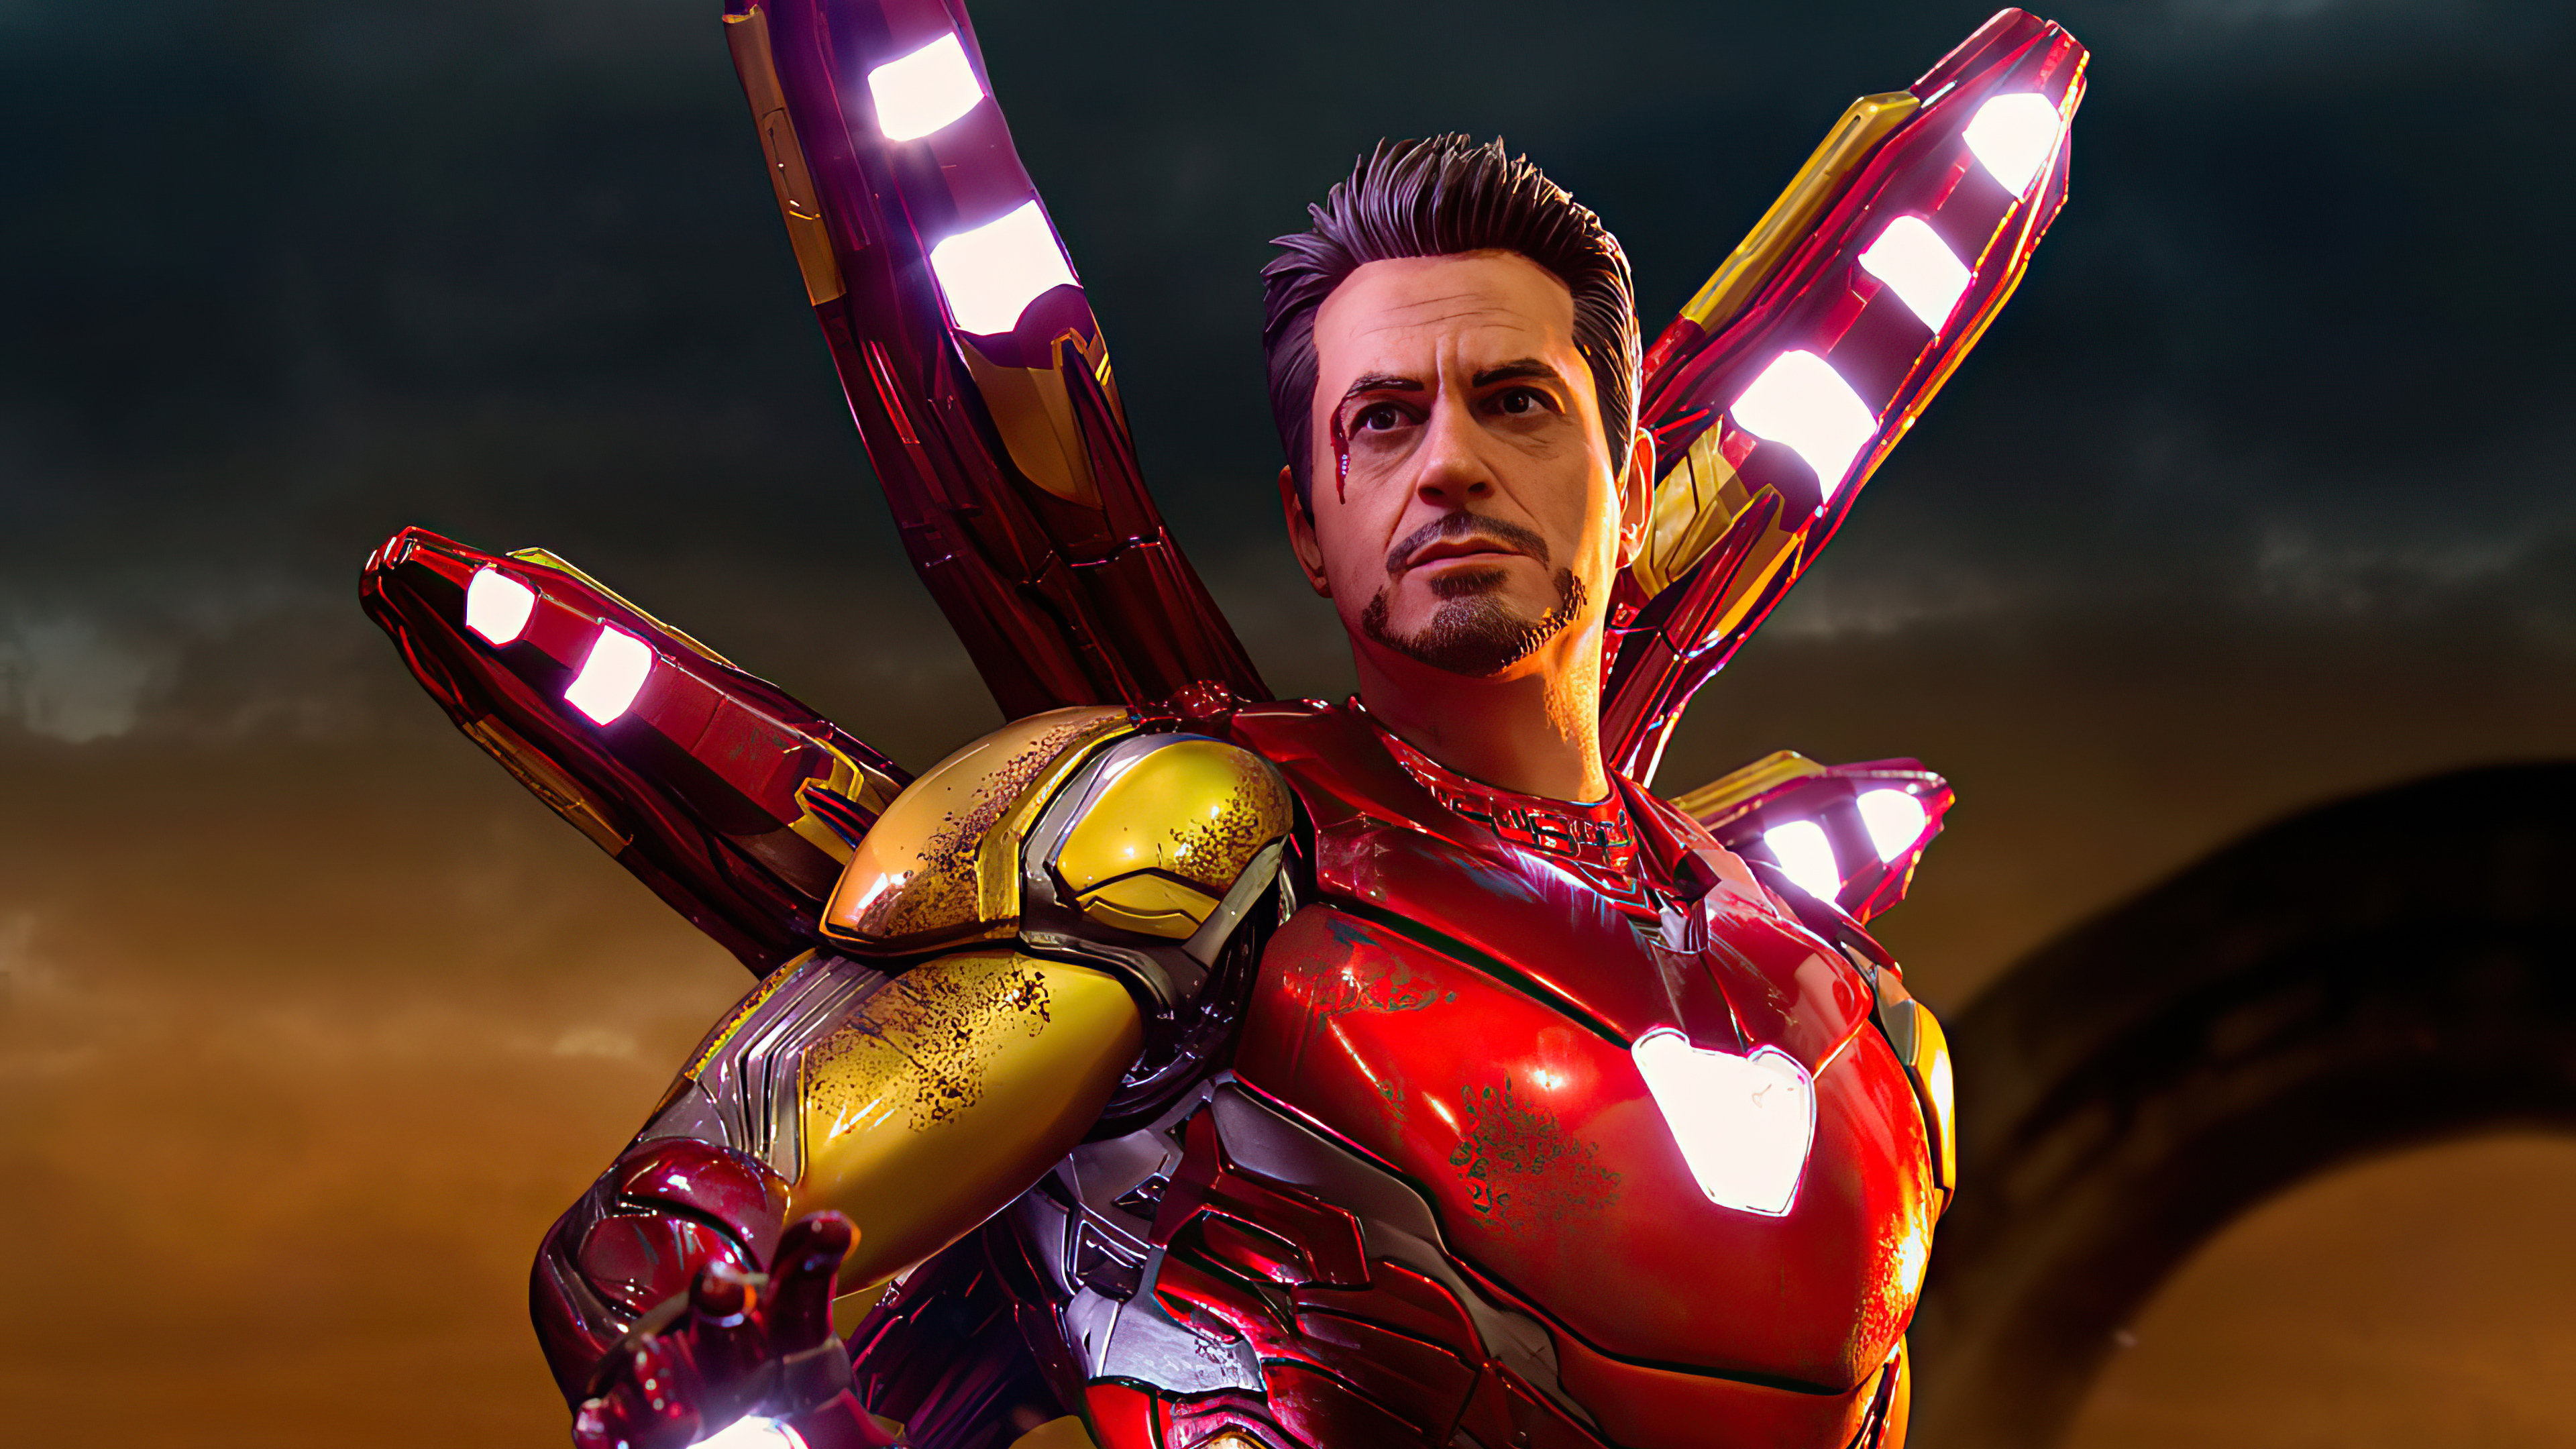 3840x2160 1920x1080 Tony Stark 4k 2020 Laptop Full HD 1080P HD 4k Wallpapers, Images, Backgrounds, Photos and Pictures